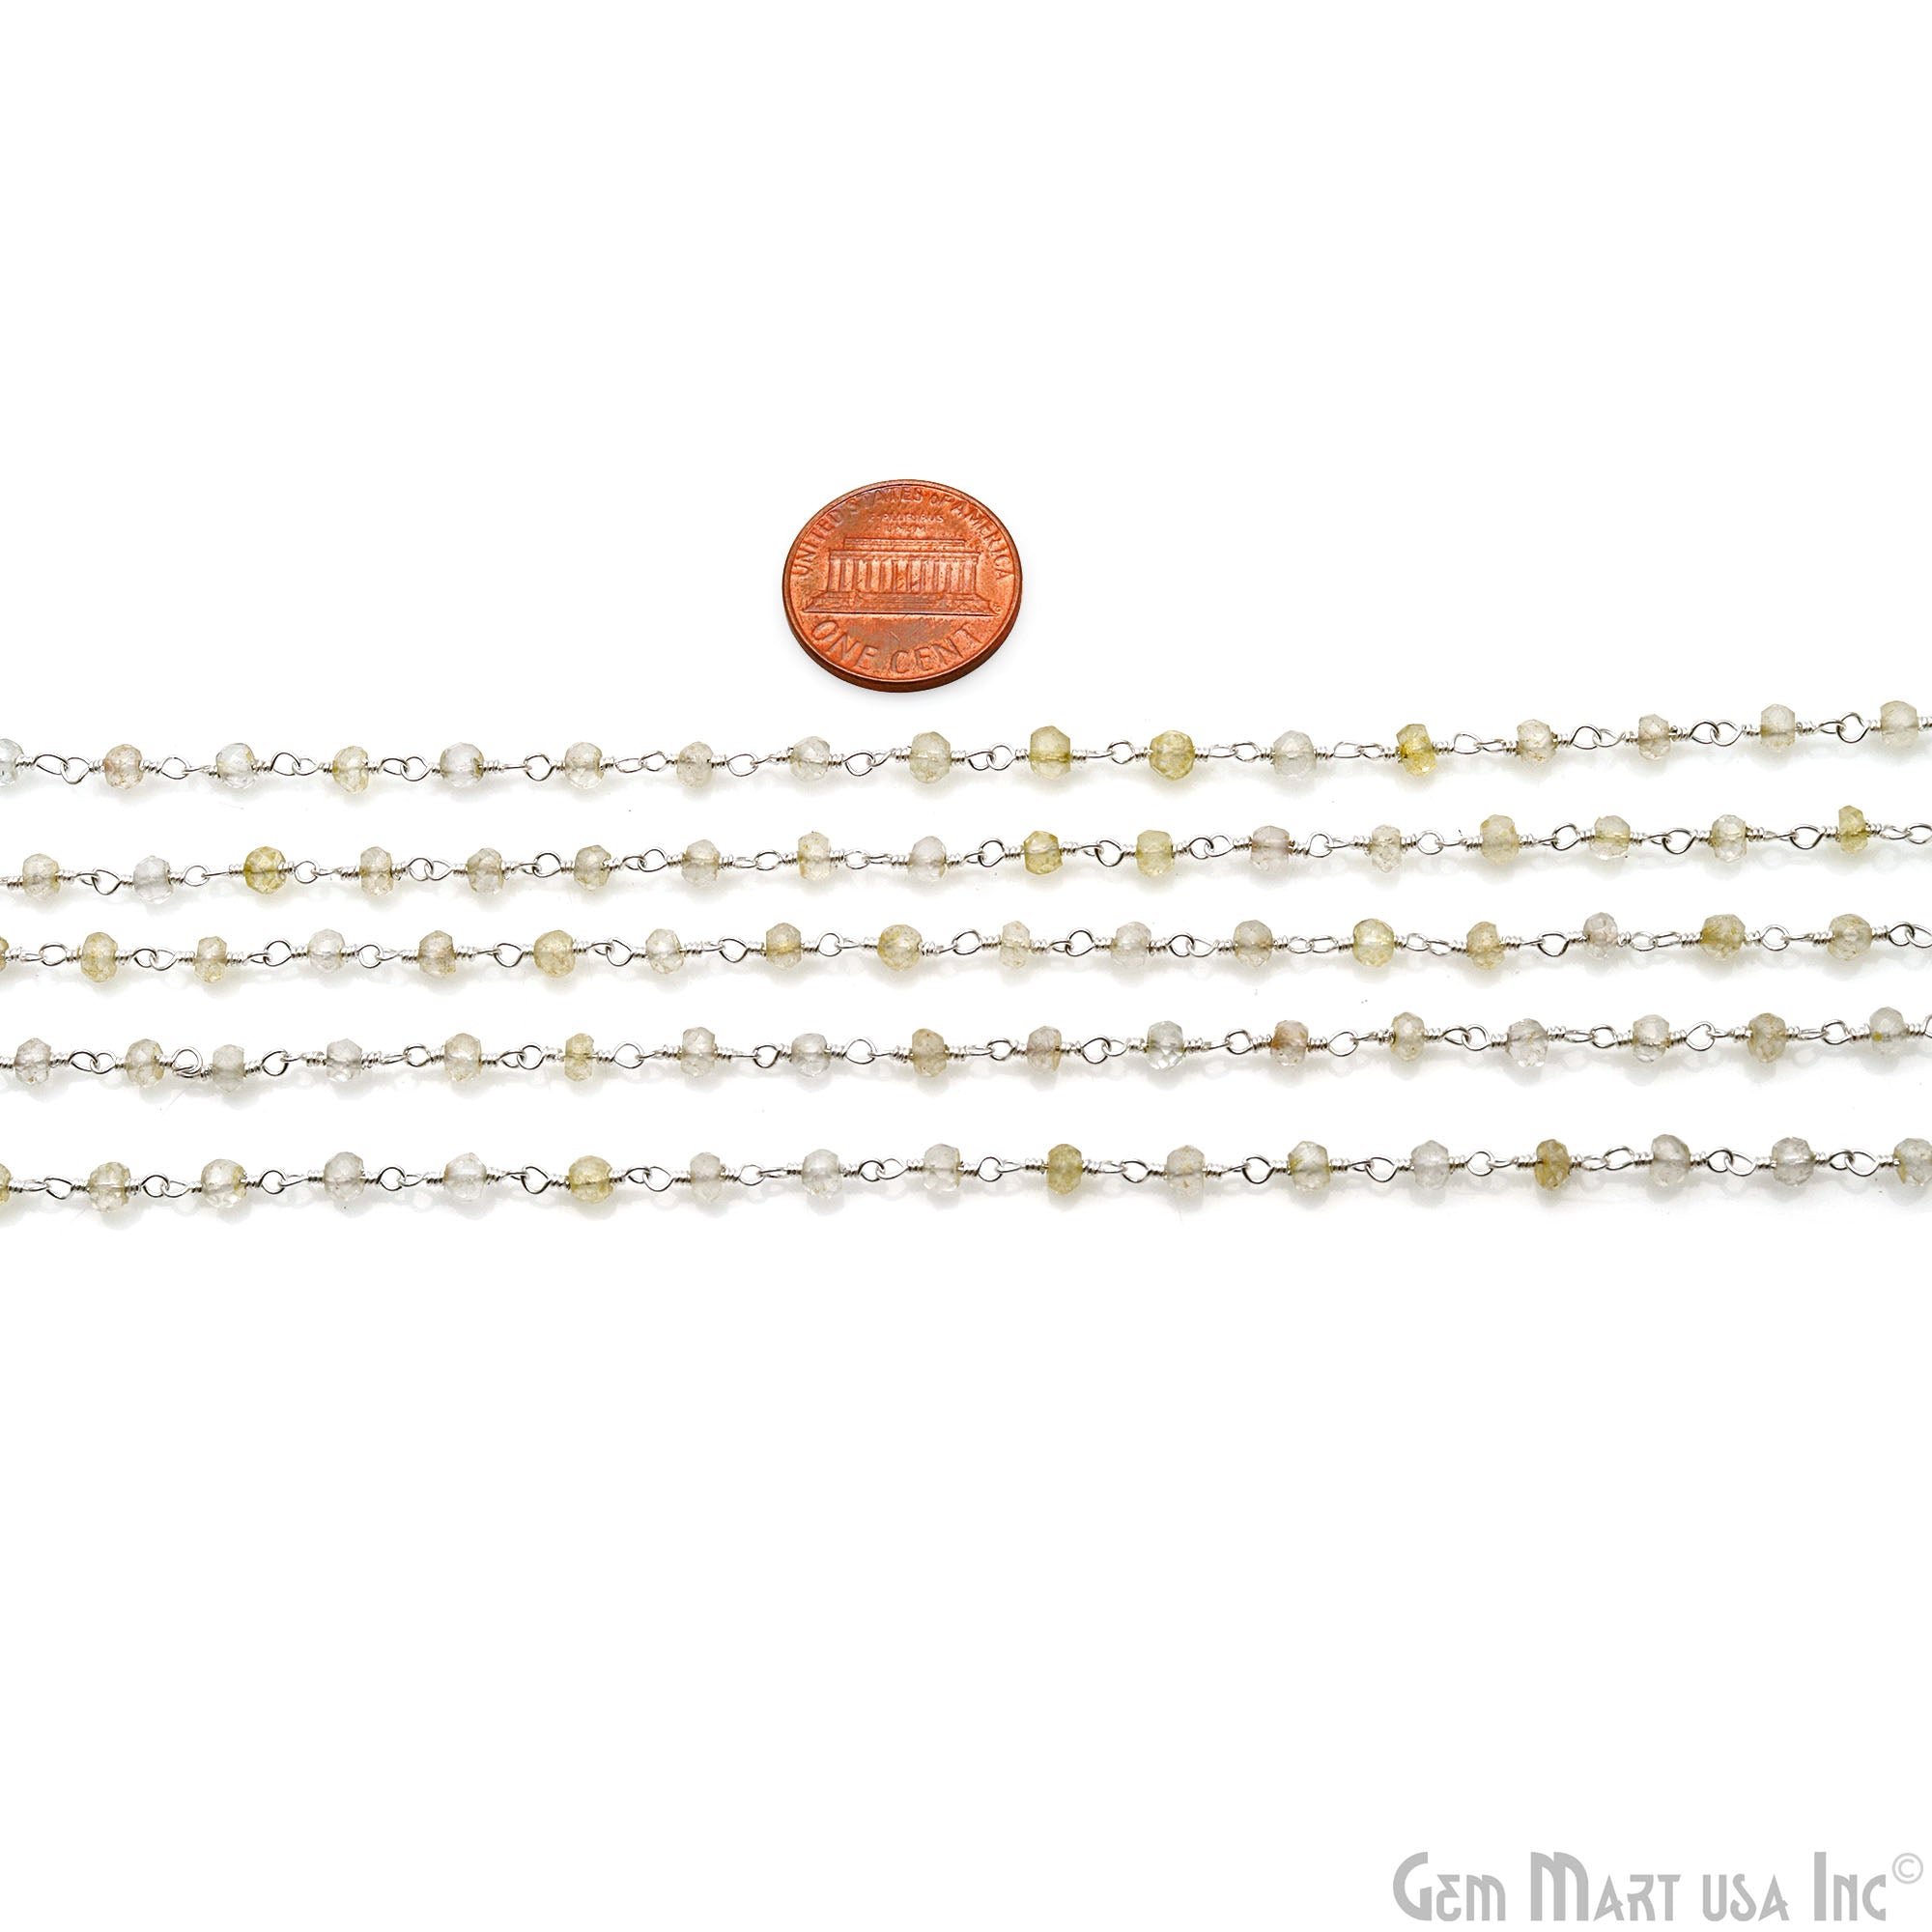 Lemon Topaz Faceted Coin 3-3.5mm Silver Wire Wrapped Rosary Chain